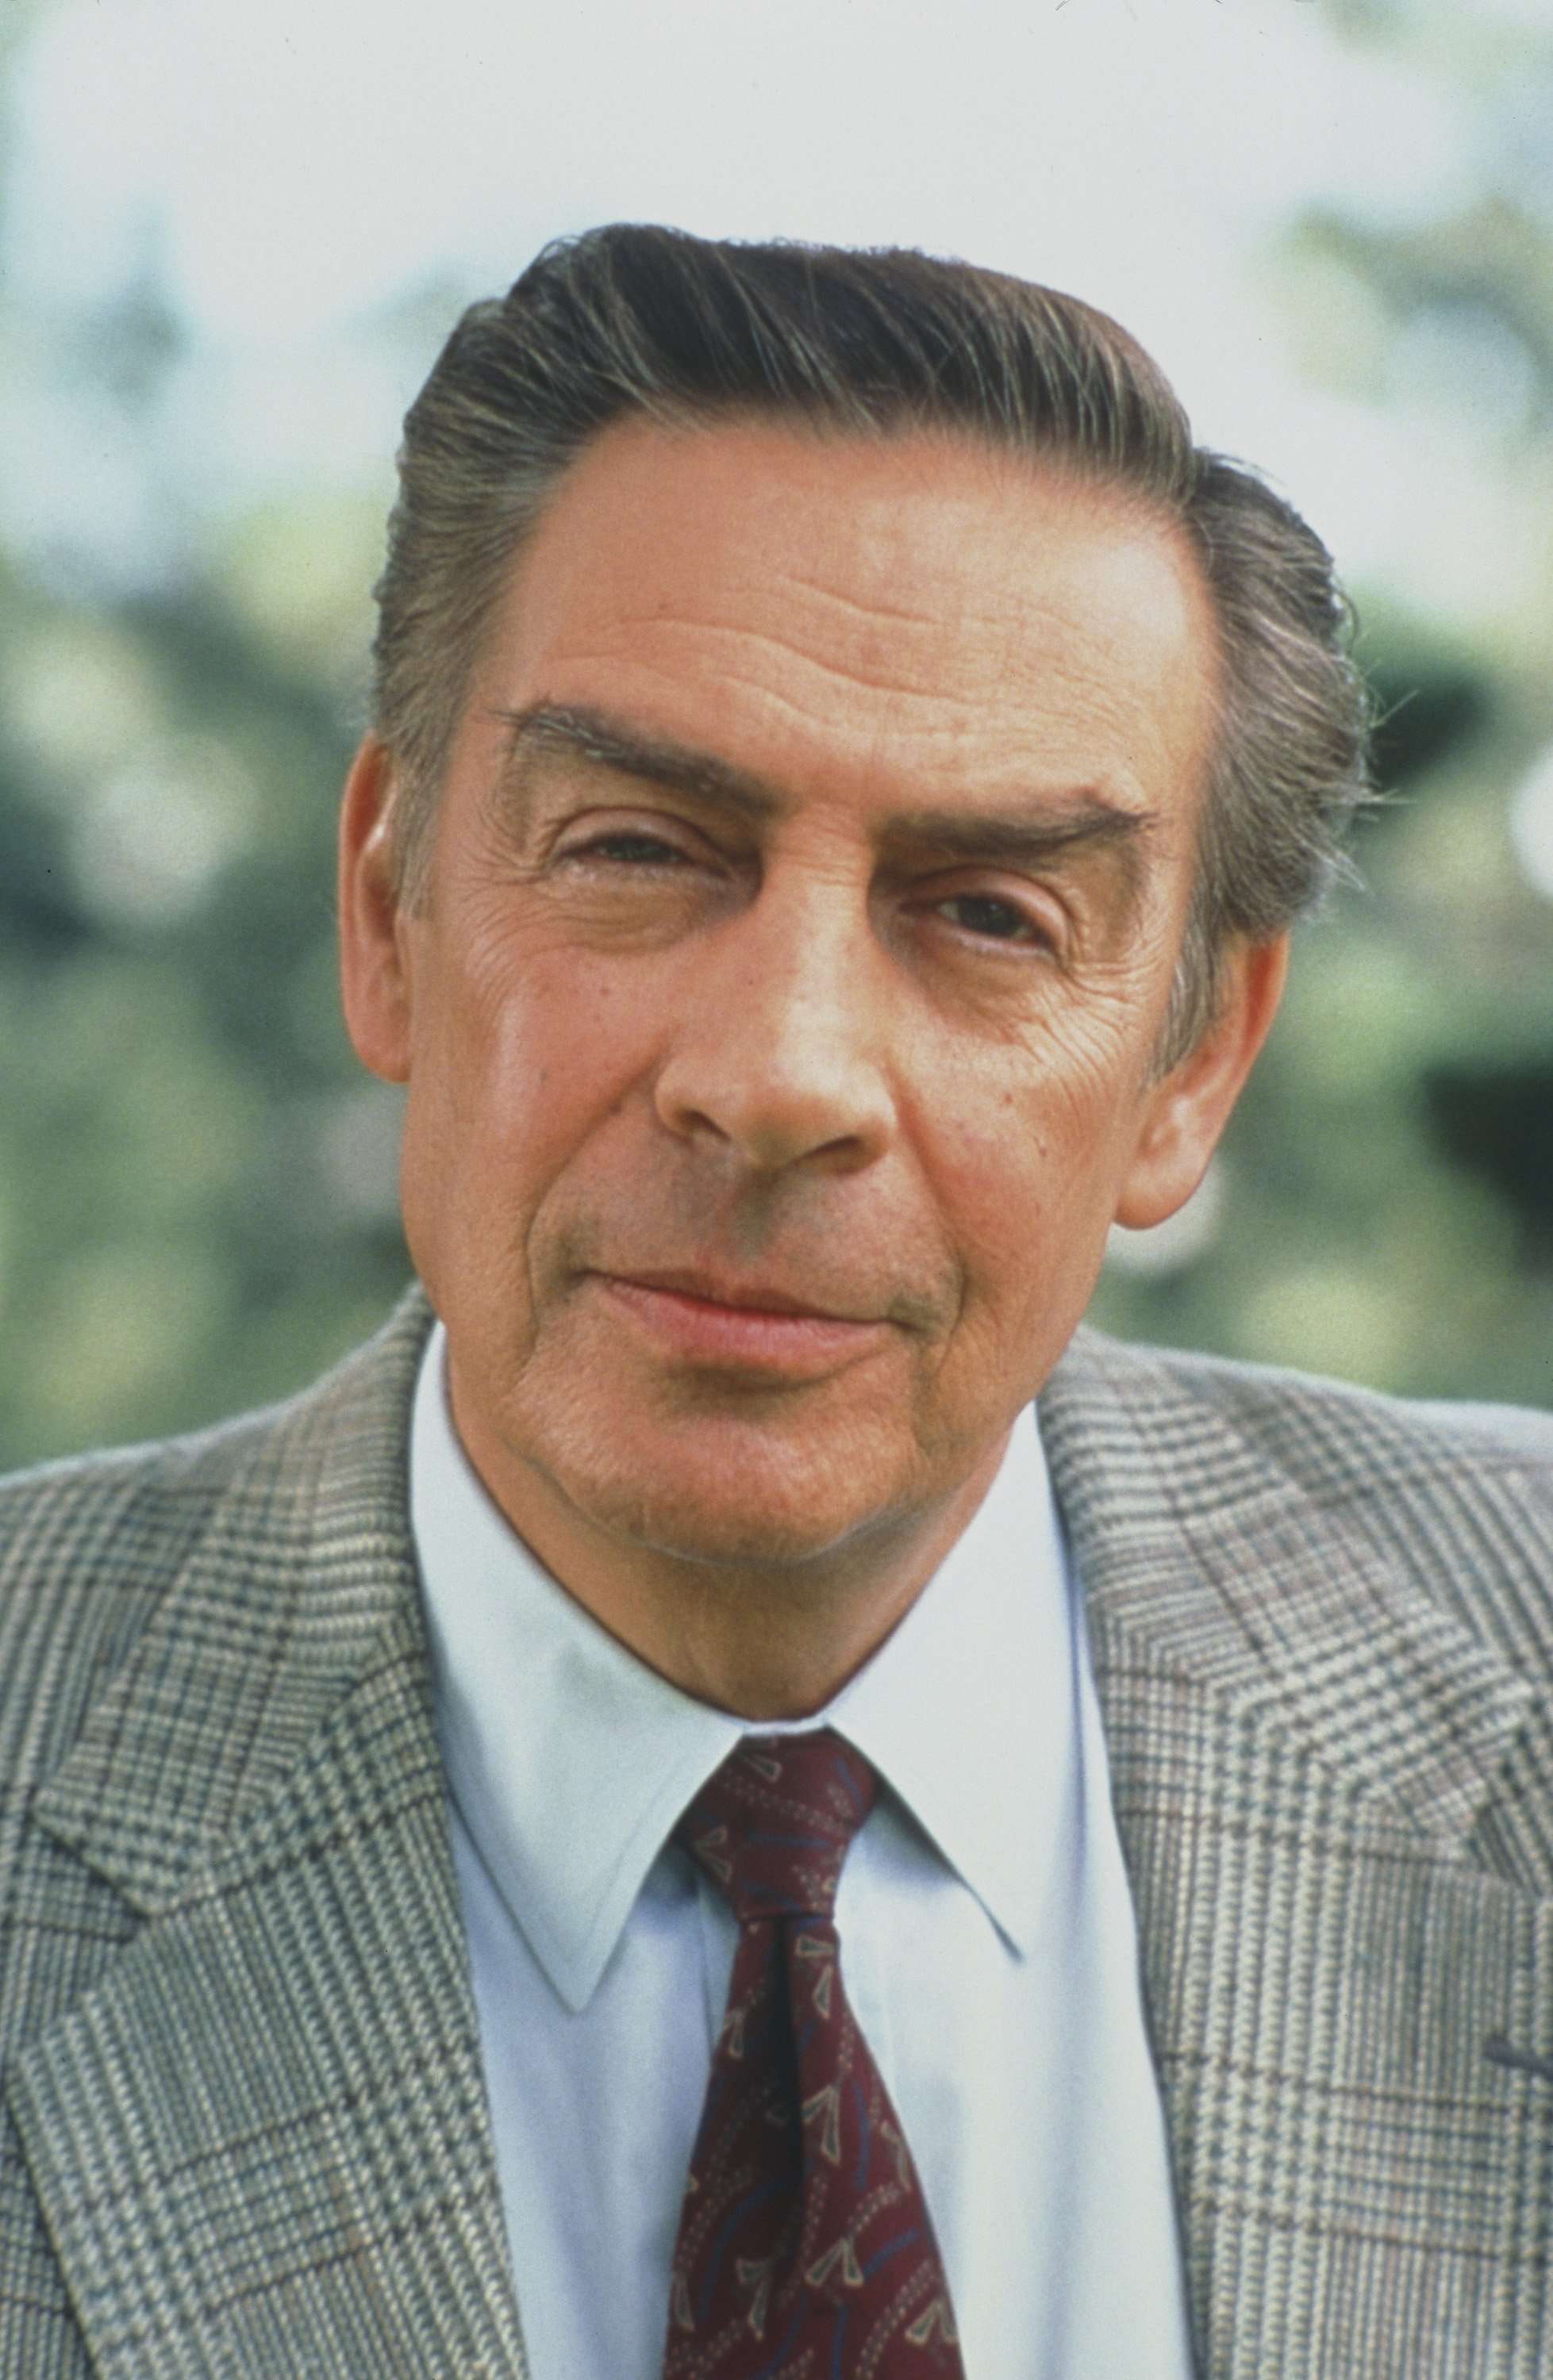 Jerry Orbach as Detective Lennie Briscoe on an episode of "Law & Order" on March 20 1997 | Source: Getty Images